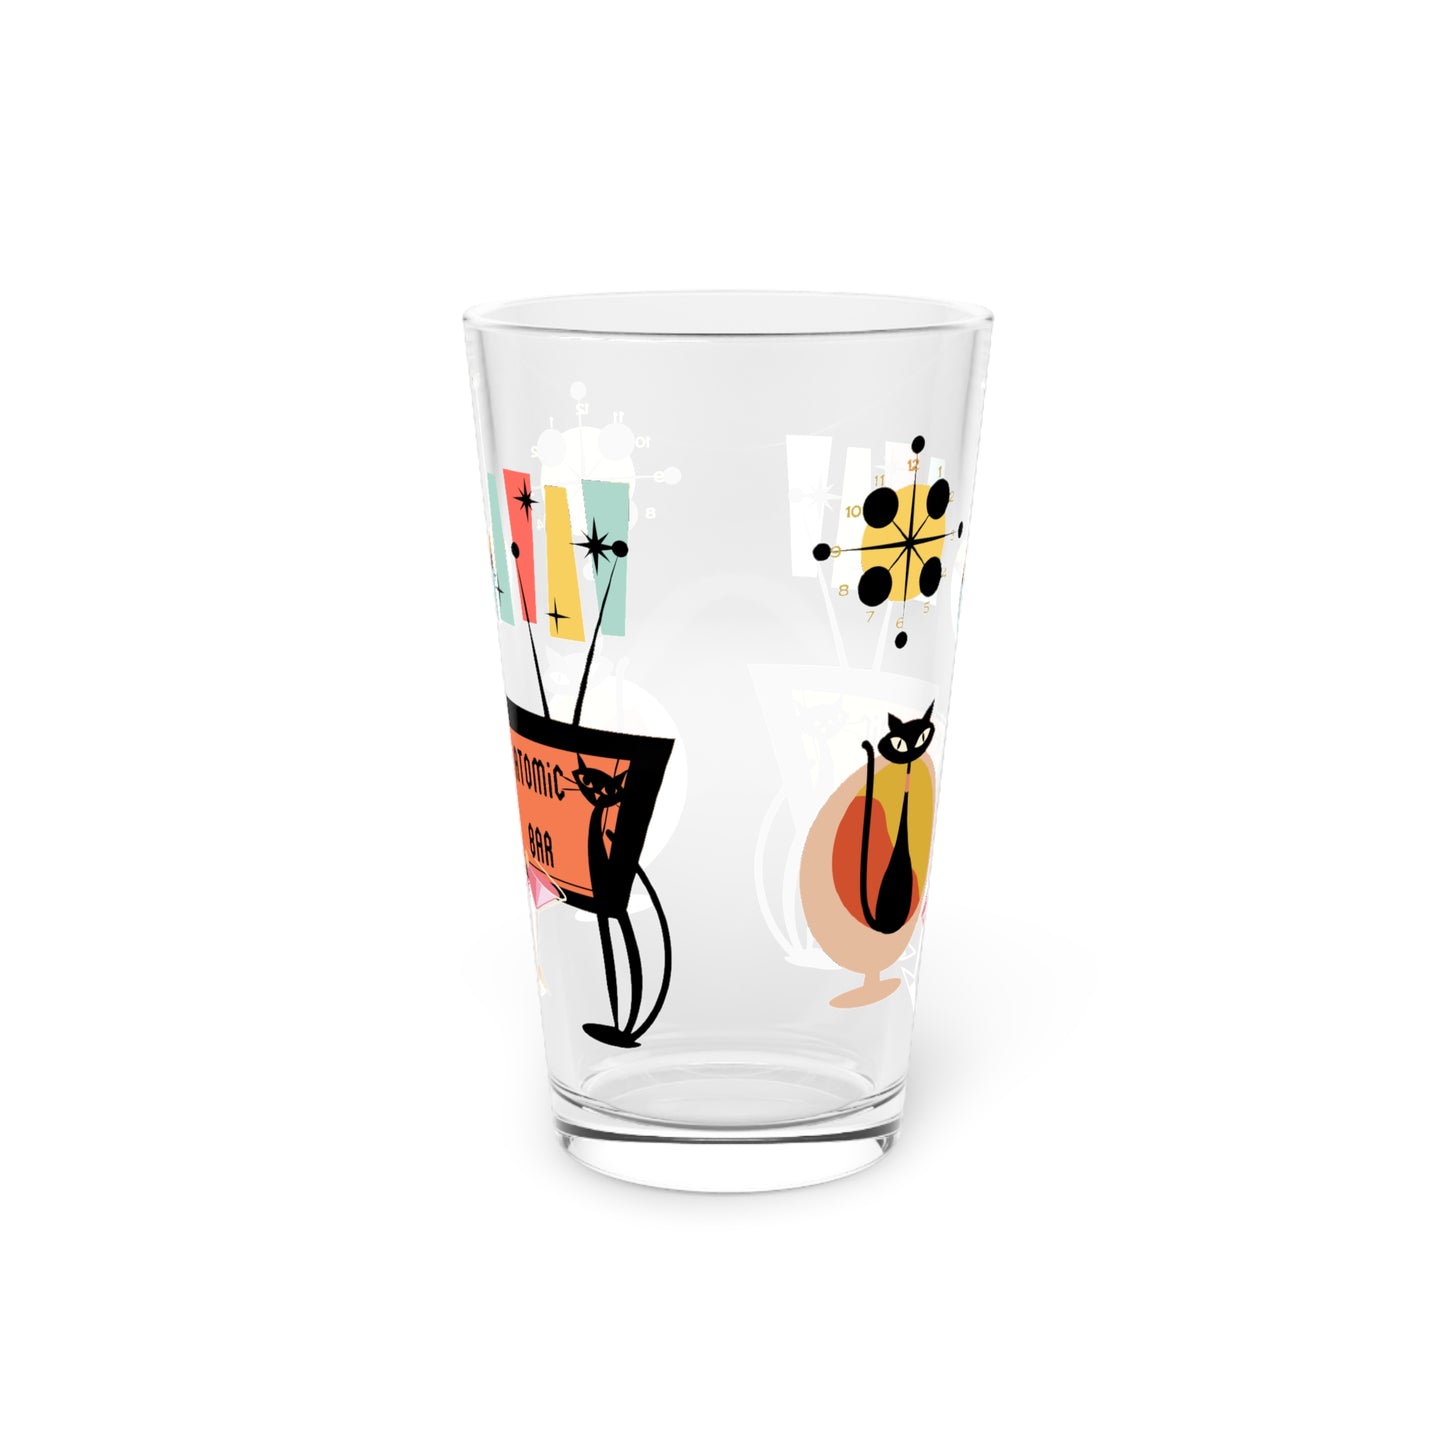 Atomic Bar retro cat Pint Glass, 16oz, retro party glasses, Mid Century barware, cocktail, beer, juice drinking glass,( PRICE PER GLASS)